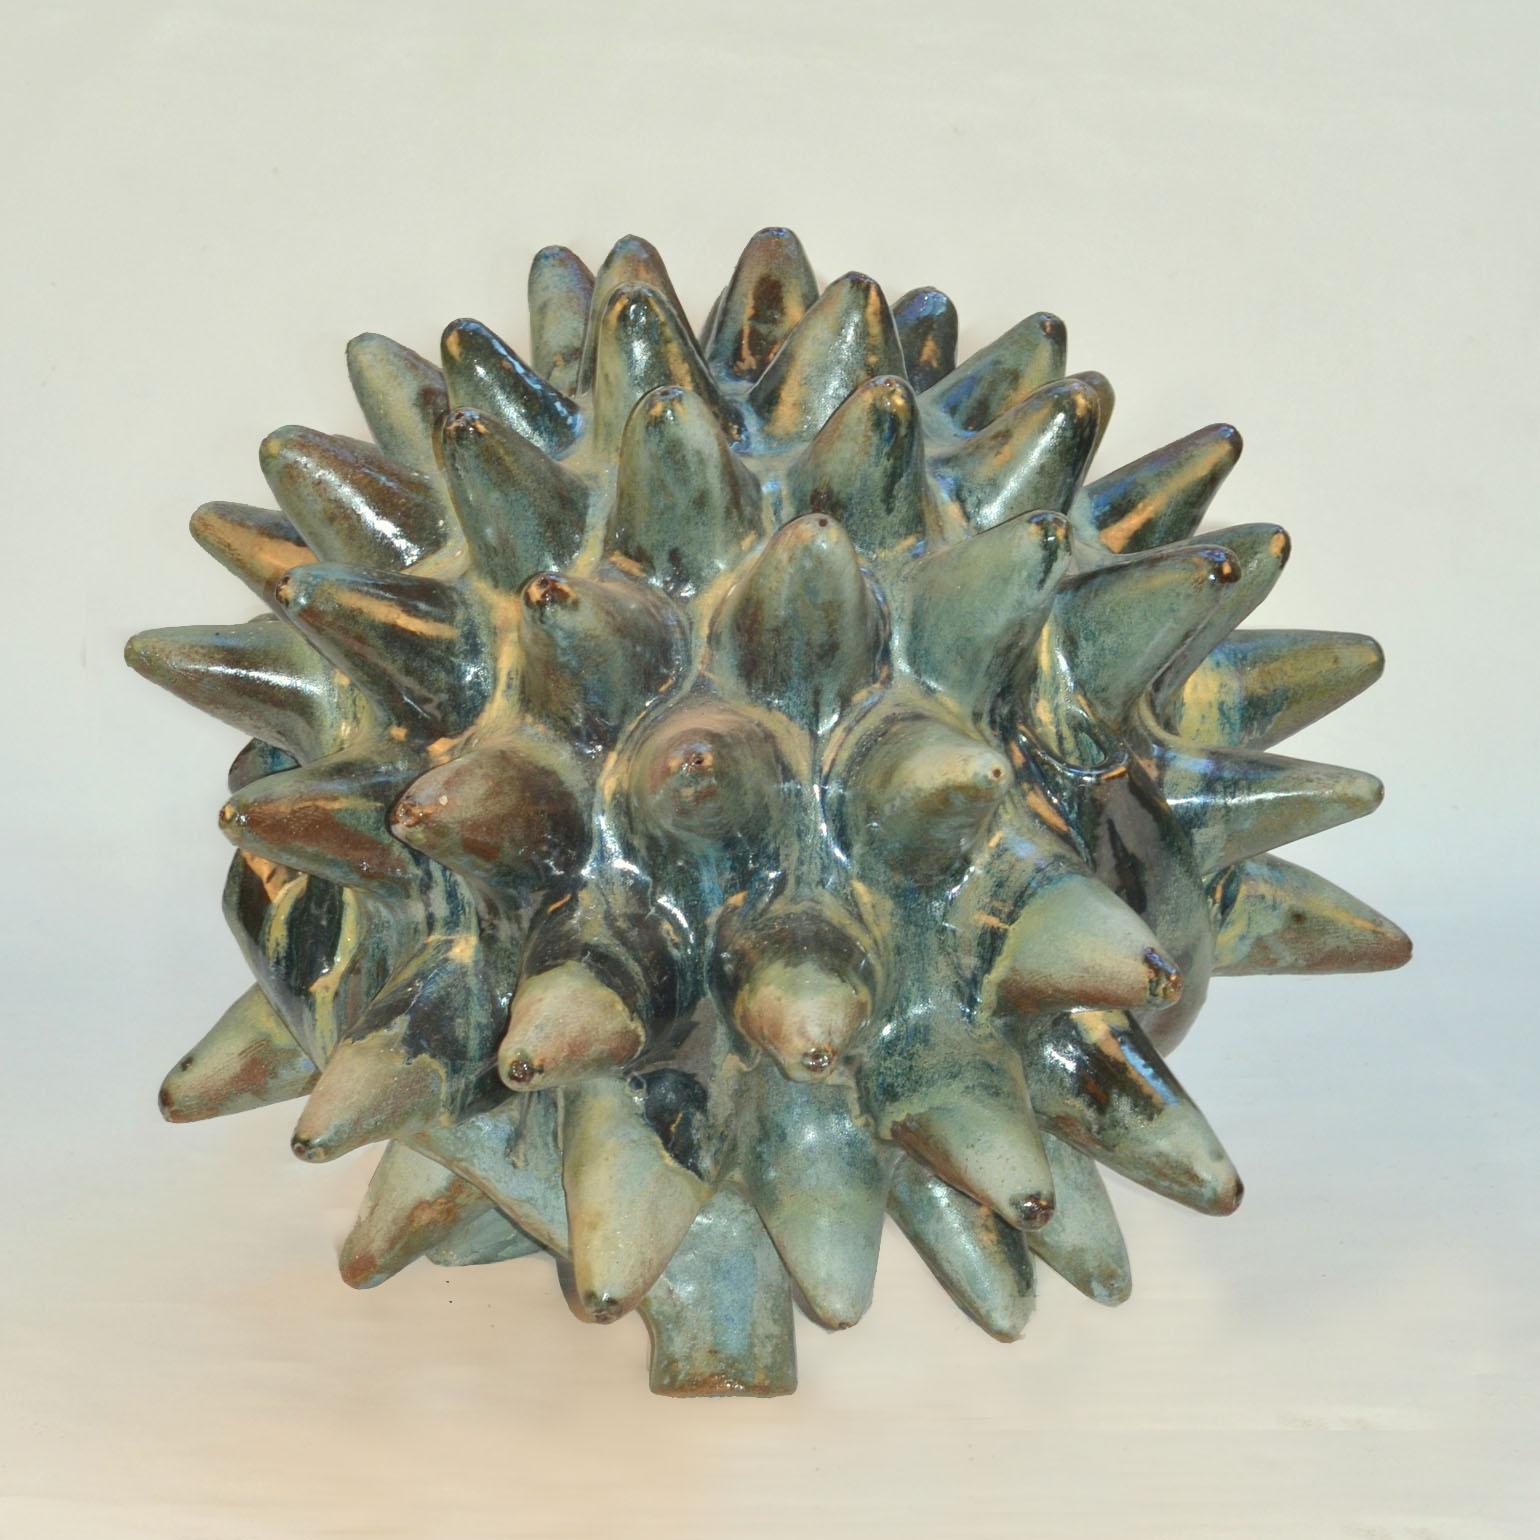 Large organic floor sculpture sculpted by the South American artist Fernando Marquina looks like an armored creature from the natural world of the Jurassic period. It is characterized by the distinctive circular cone shaped upright spikes around its